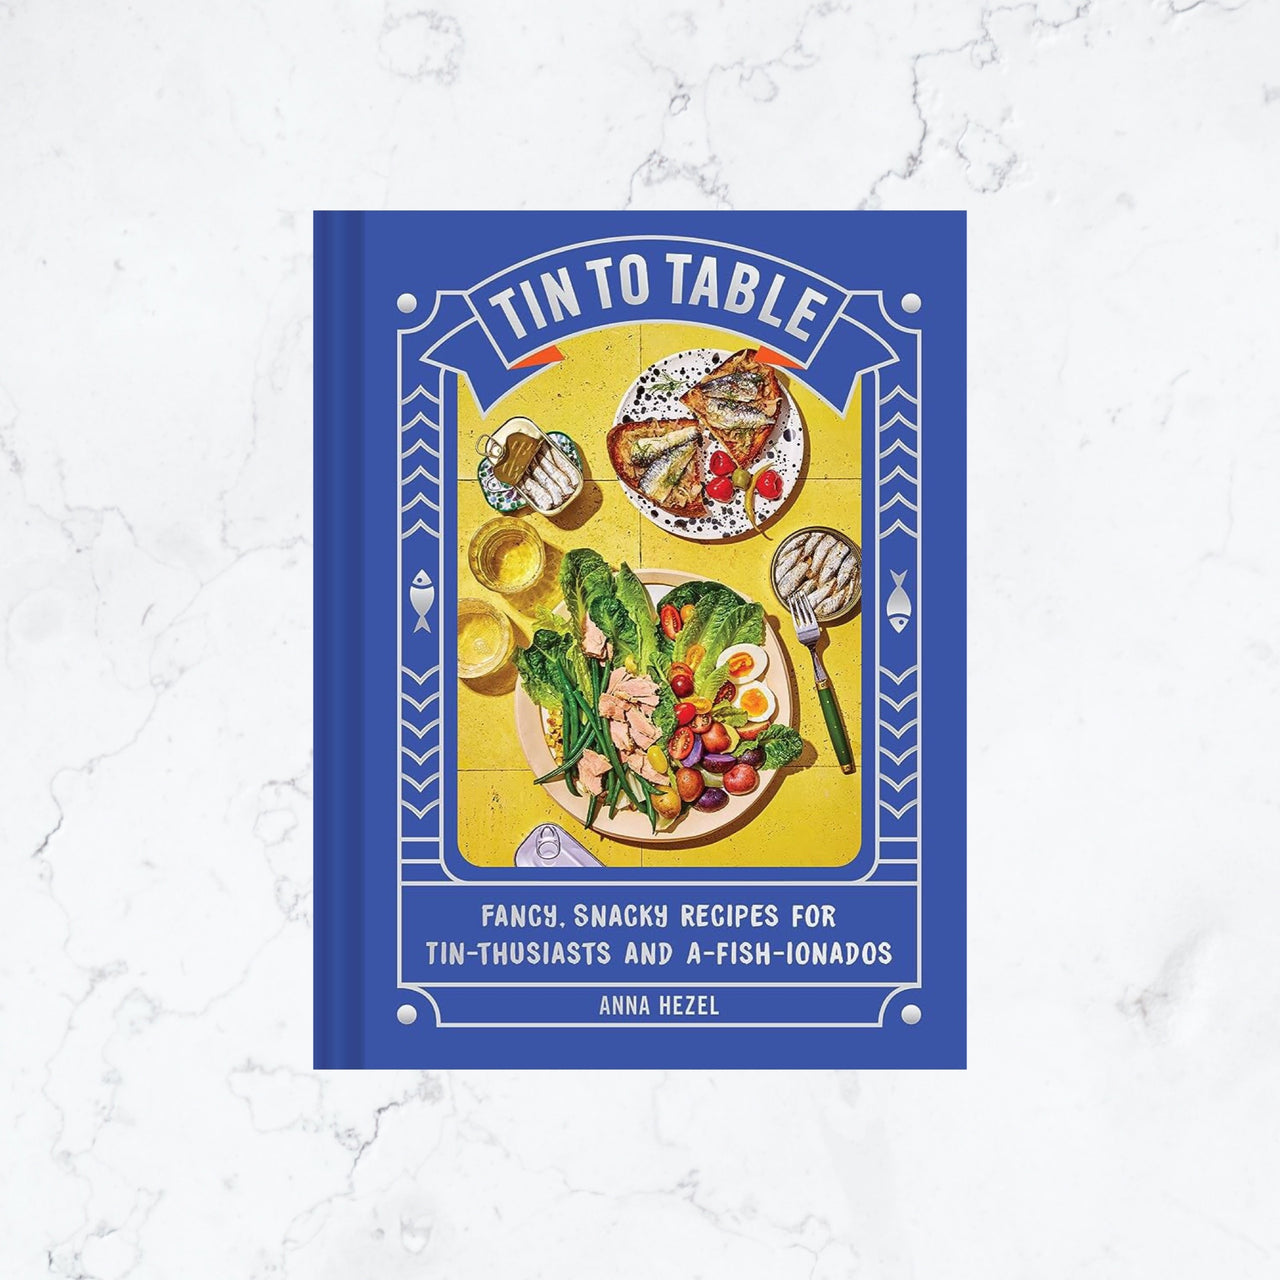 Tin to Table | Fancy, Snacky Recipes for Tin-thusiasts and A-fish-ionados